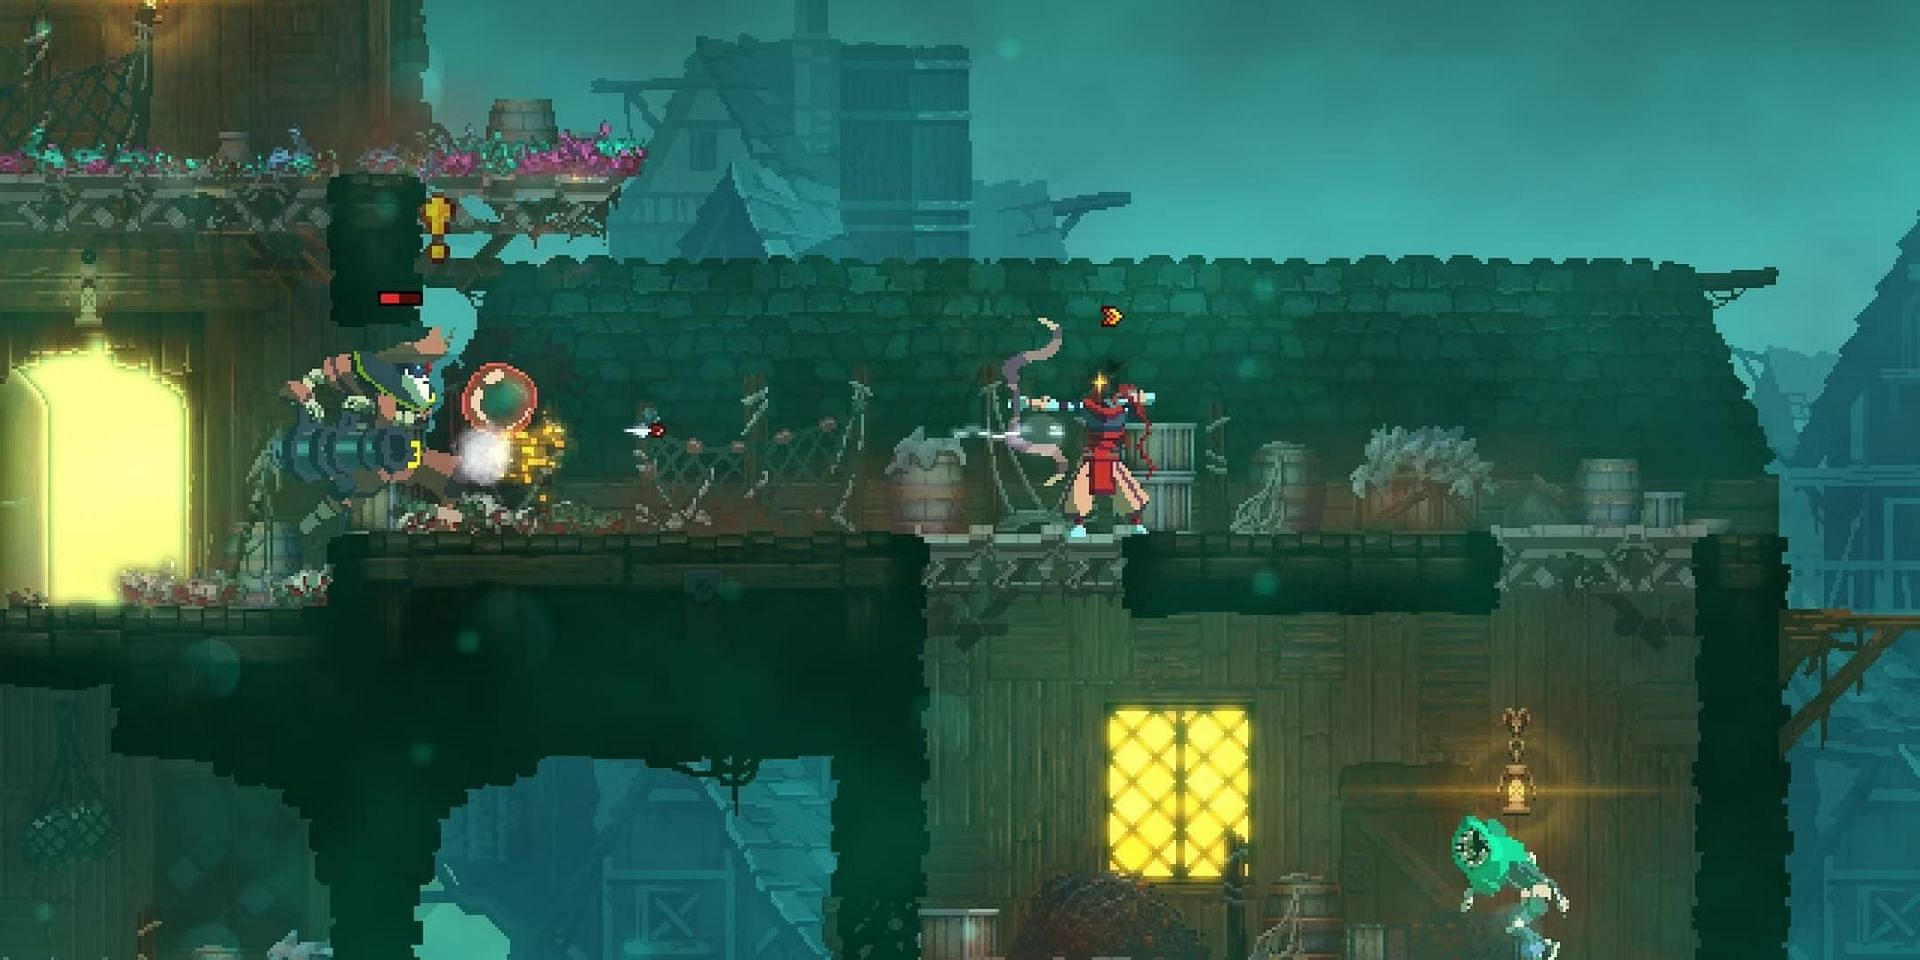 An in-game screenshot from Dead Cells (Image via Playdigious)